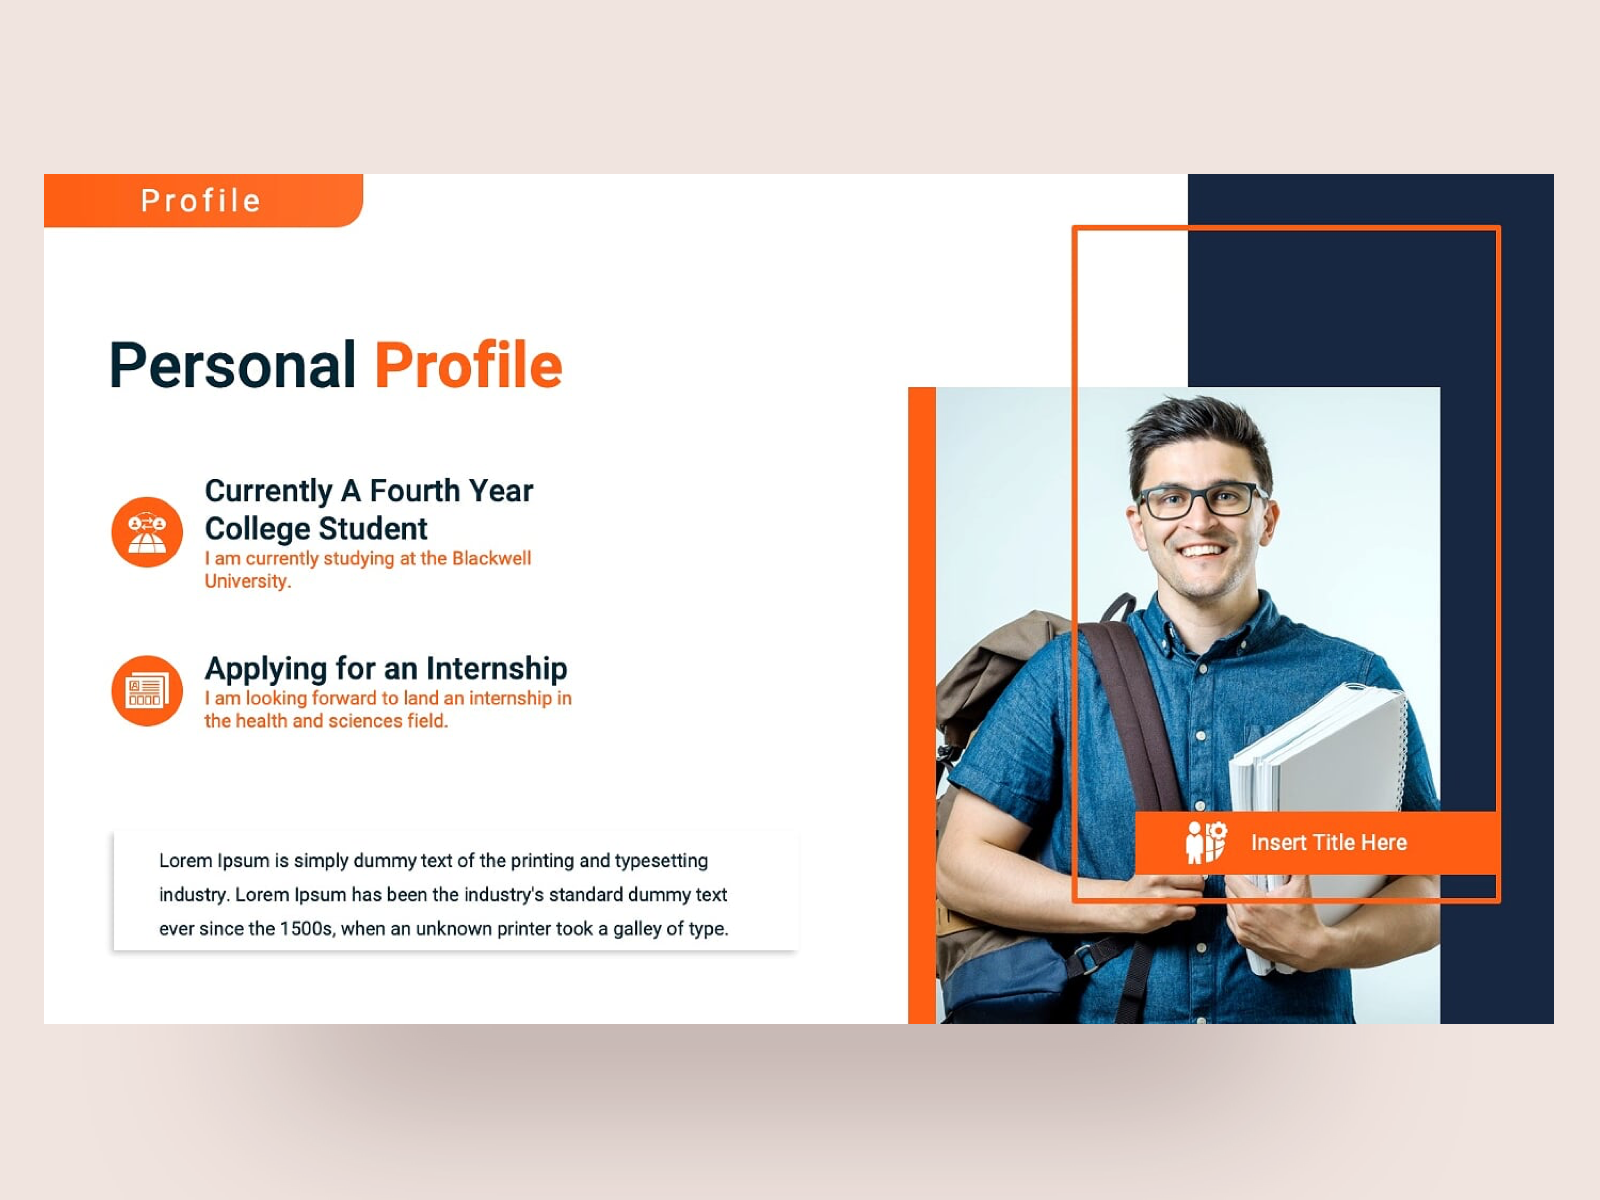 PERSONA Professional CV PowerPoint Template by Premast on Dribbble